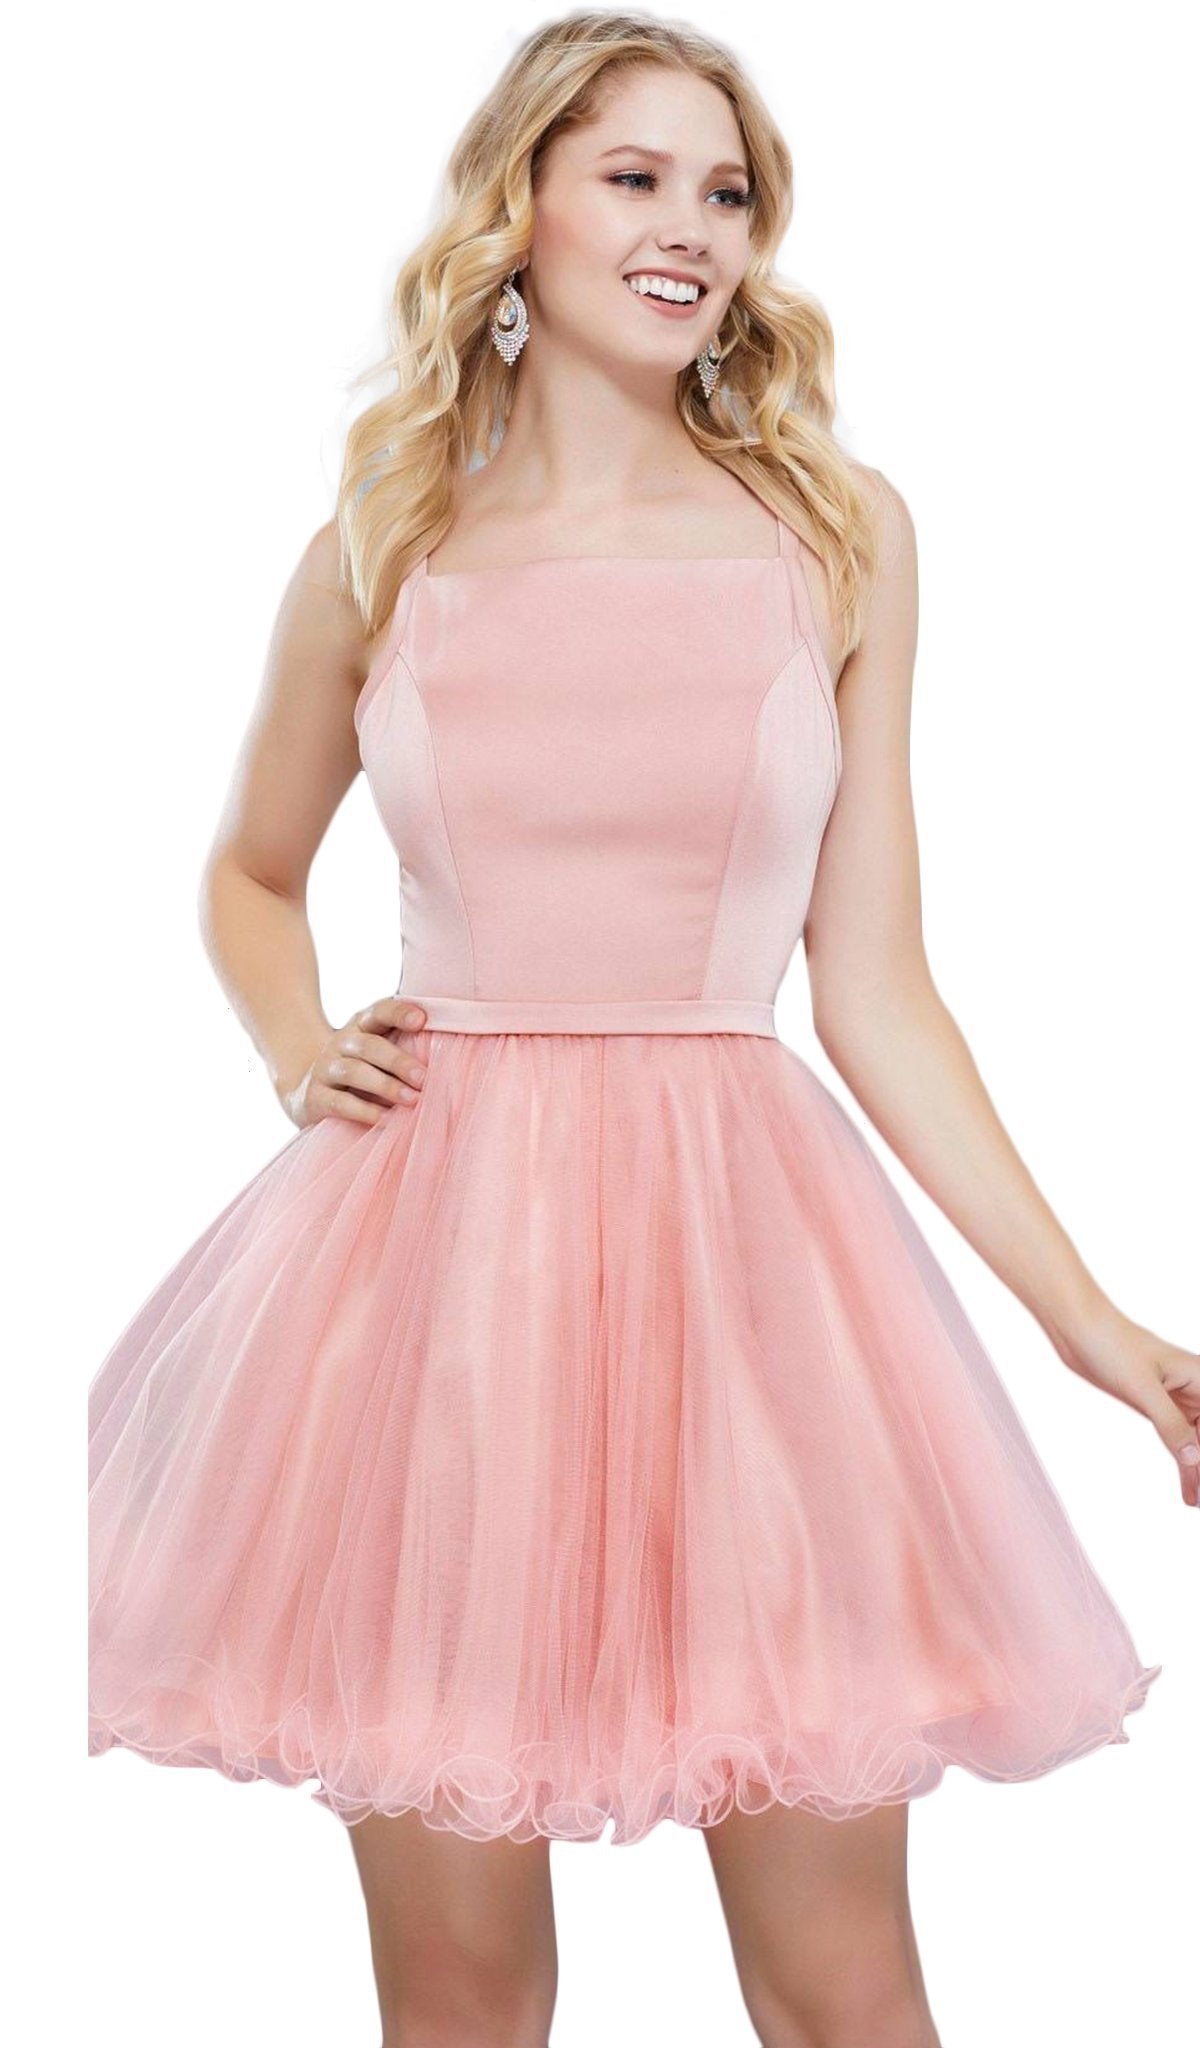 Nox Anabel - 6353 Sleeveless Straight-Across Neck Chiffon Cocktail Dress Special Occasion Dress XS / Rose